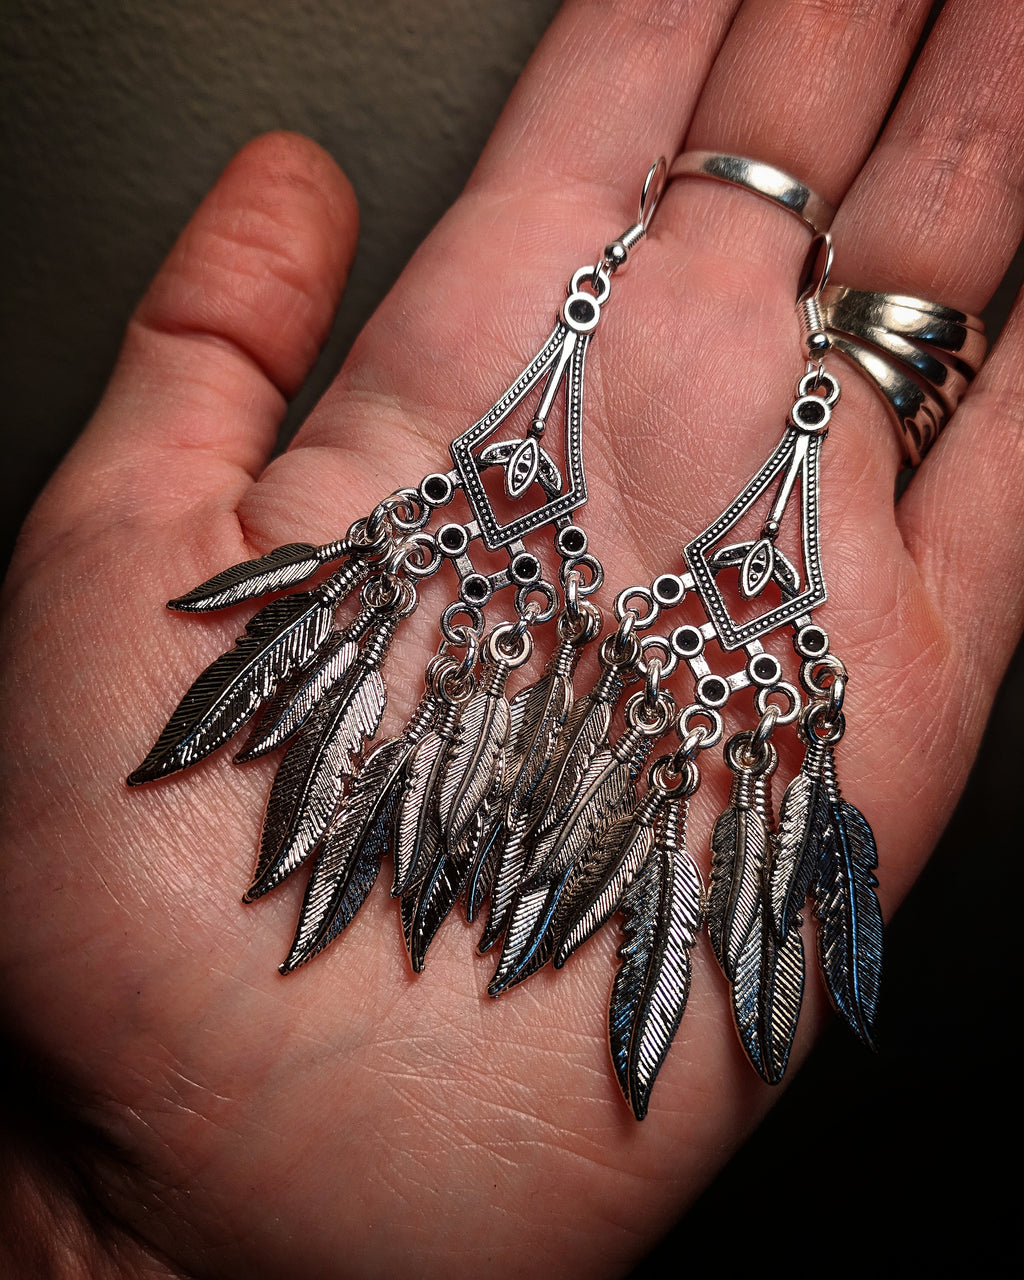 Decorative Cathedral Triangle Metal Chandelier Dreamcatcher Feather Silver Colored Earrings With Surgical Stainless Steel Ear Hooks